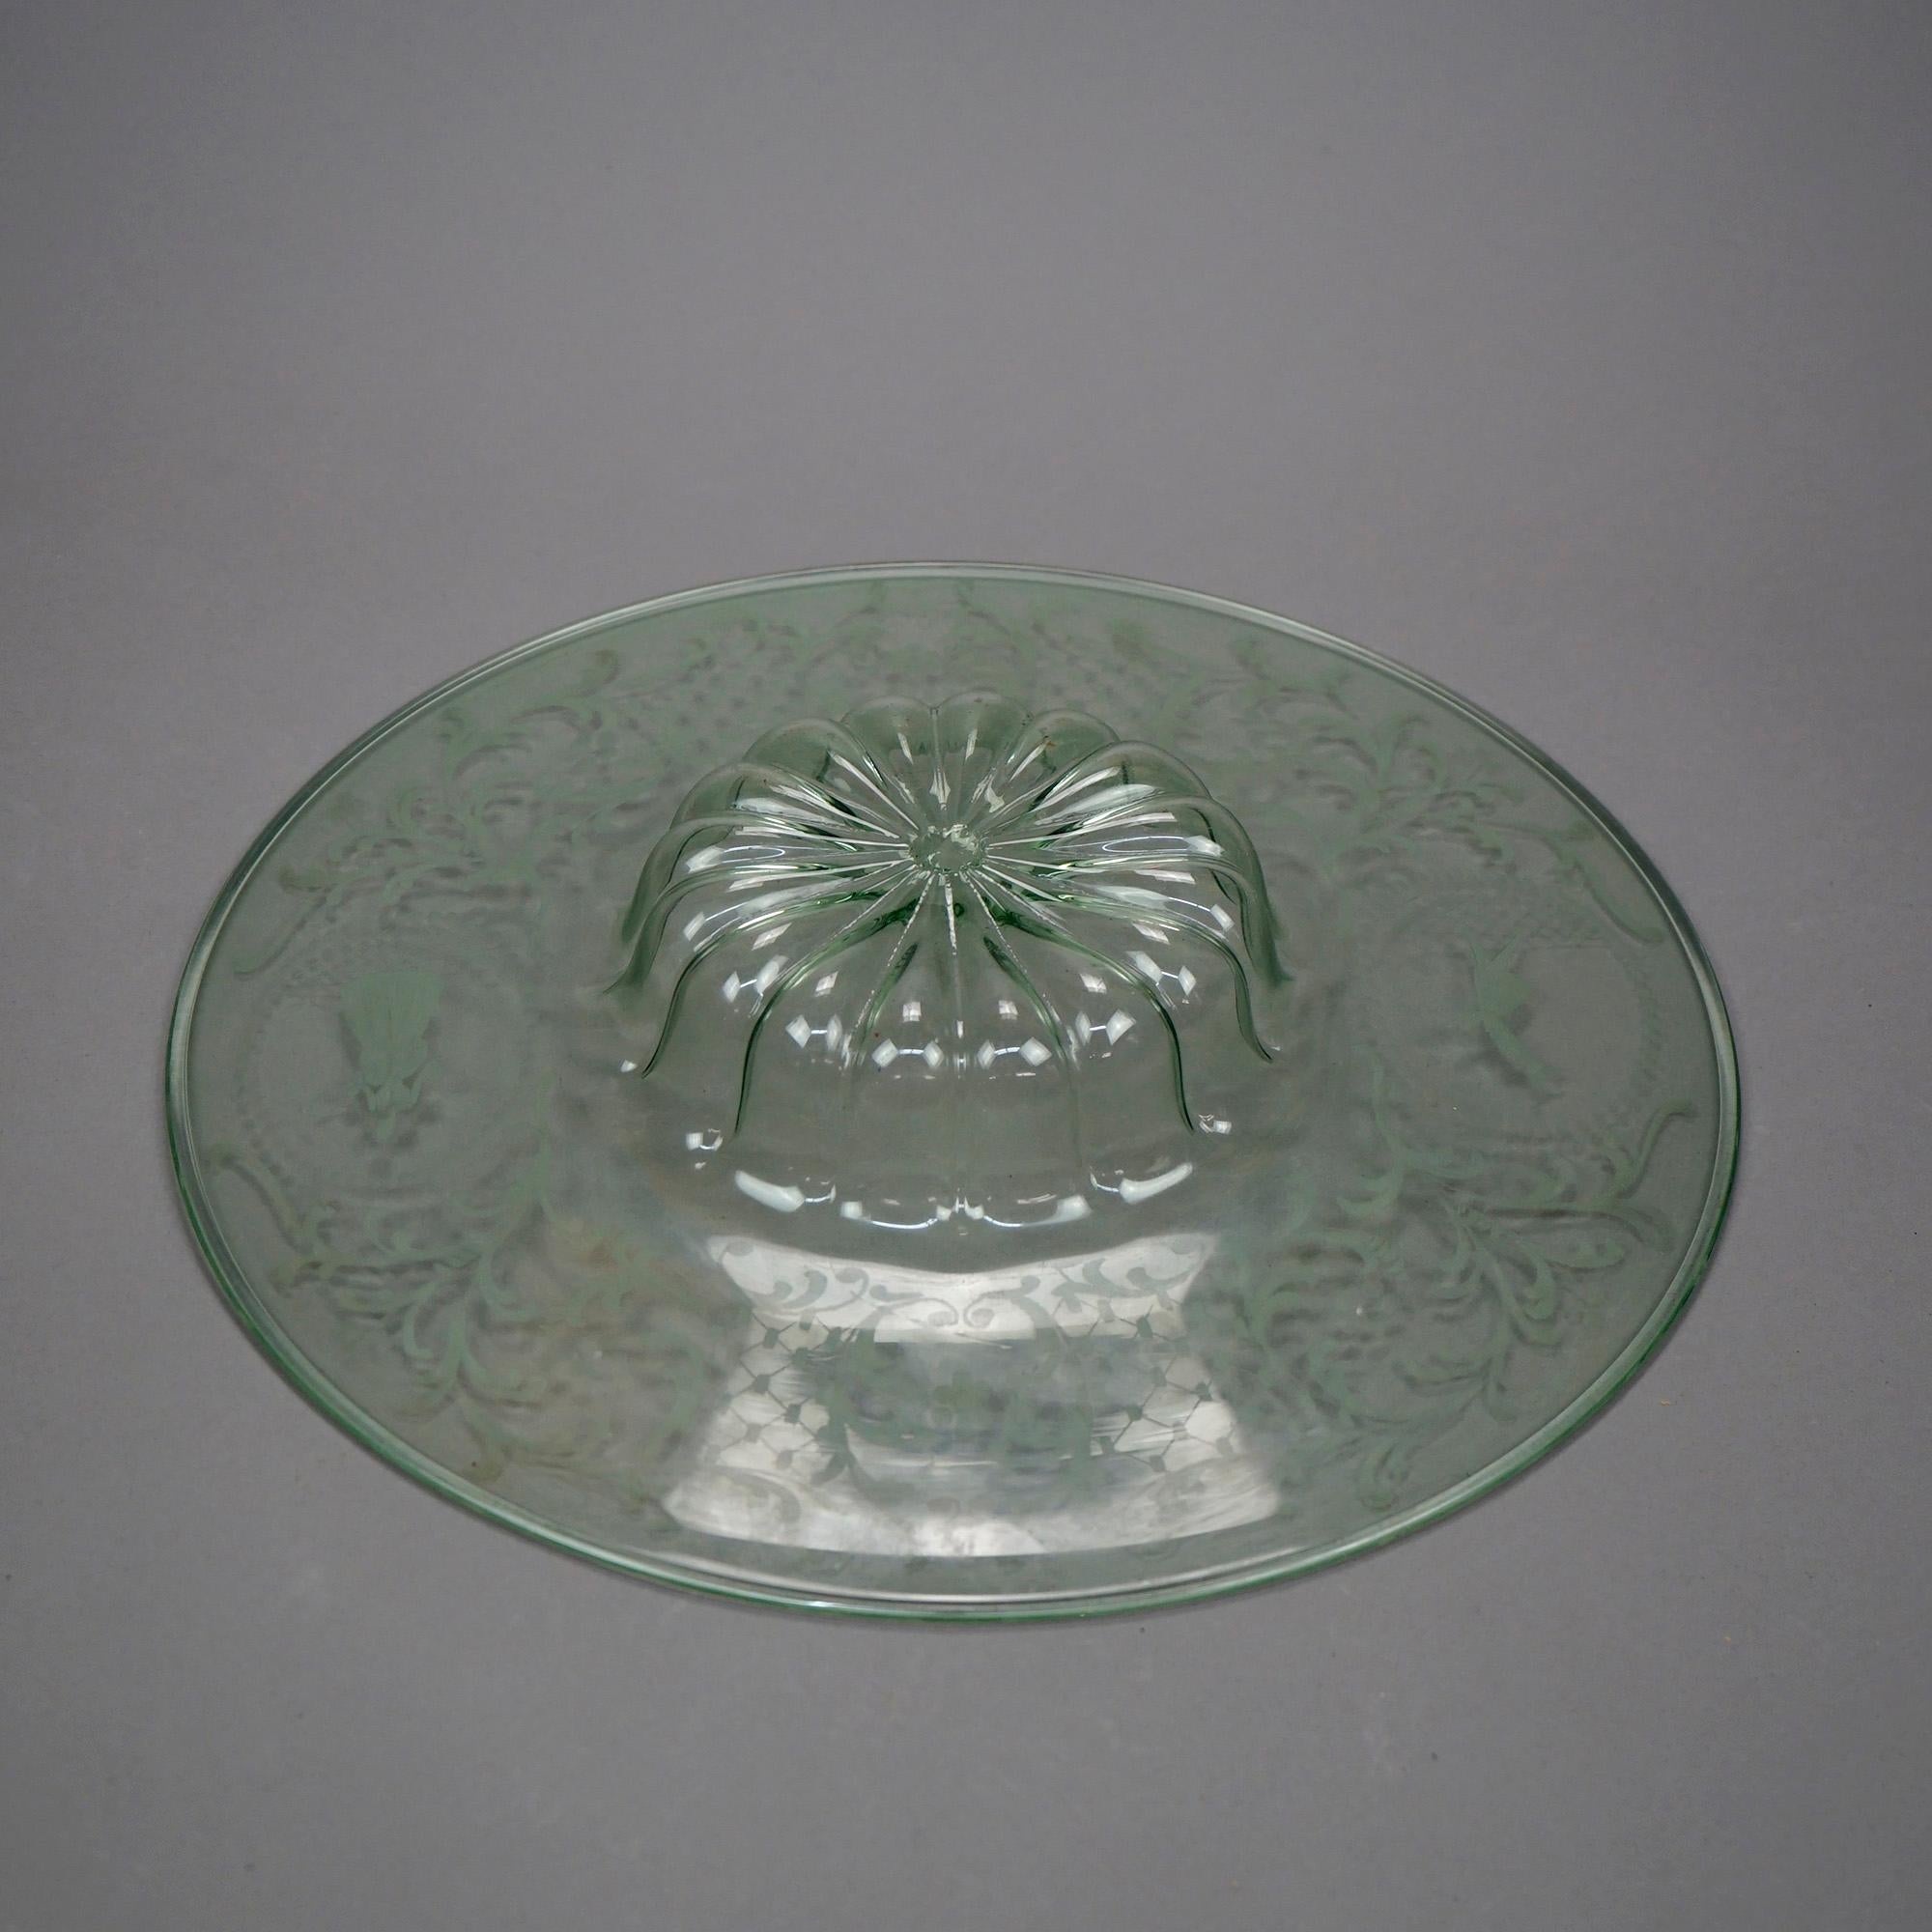 Antique Elegant Etched Glass Cameo Charger Center Bowl Circa 1920 For Sale 7